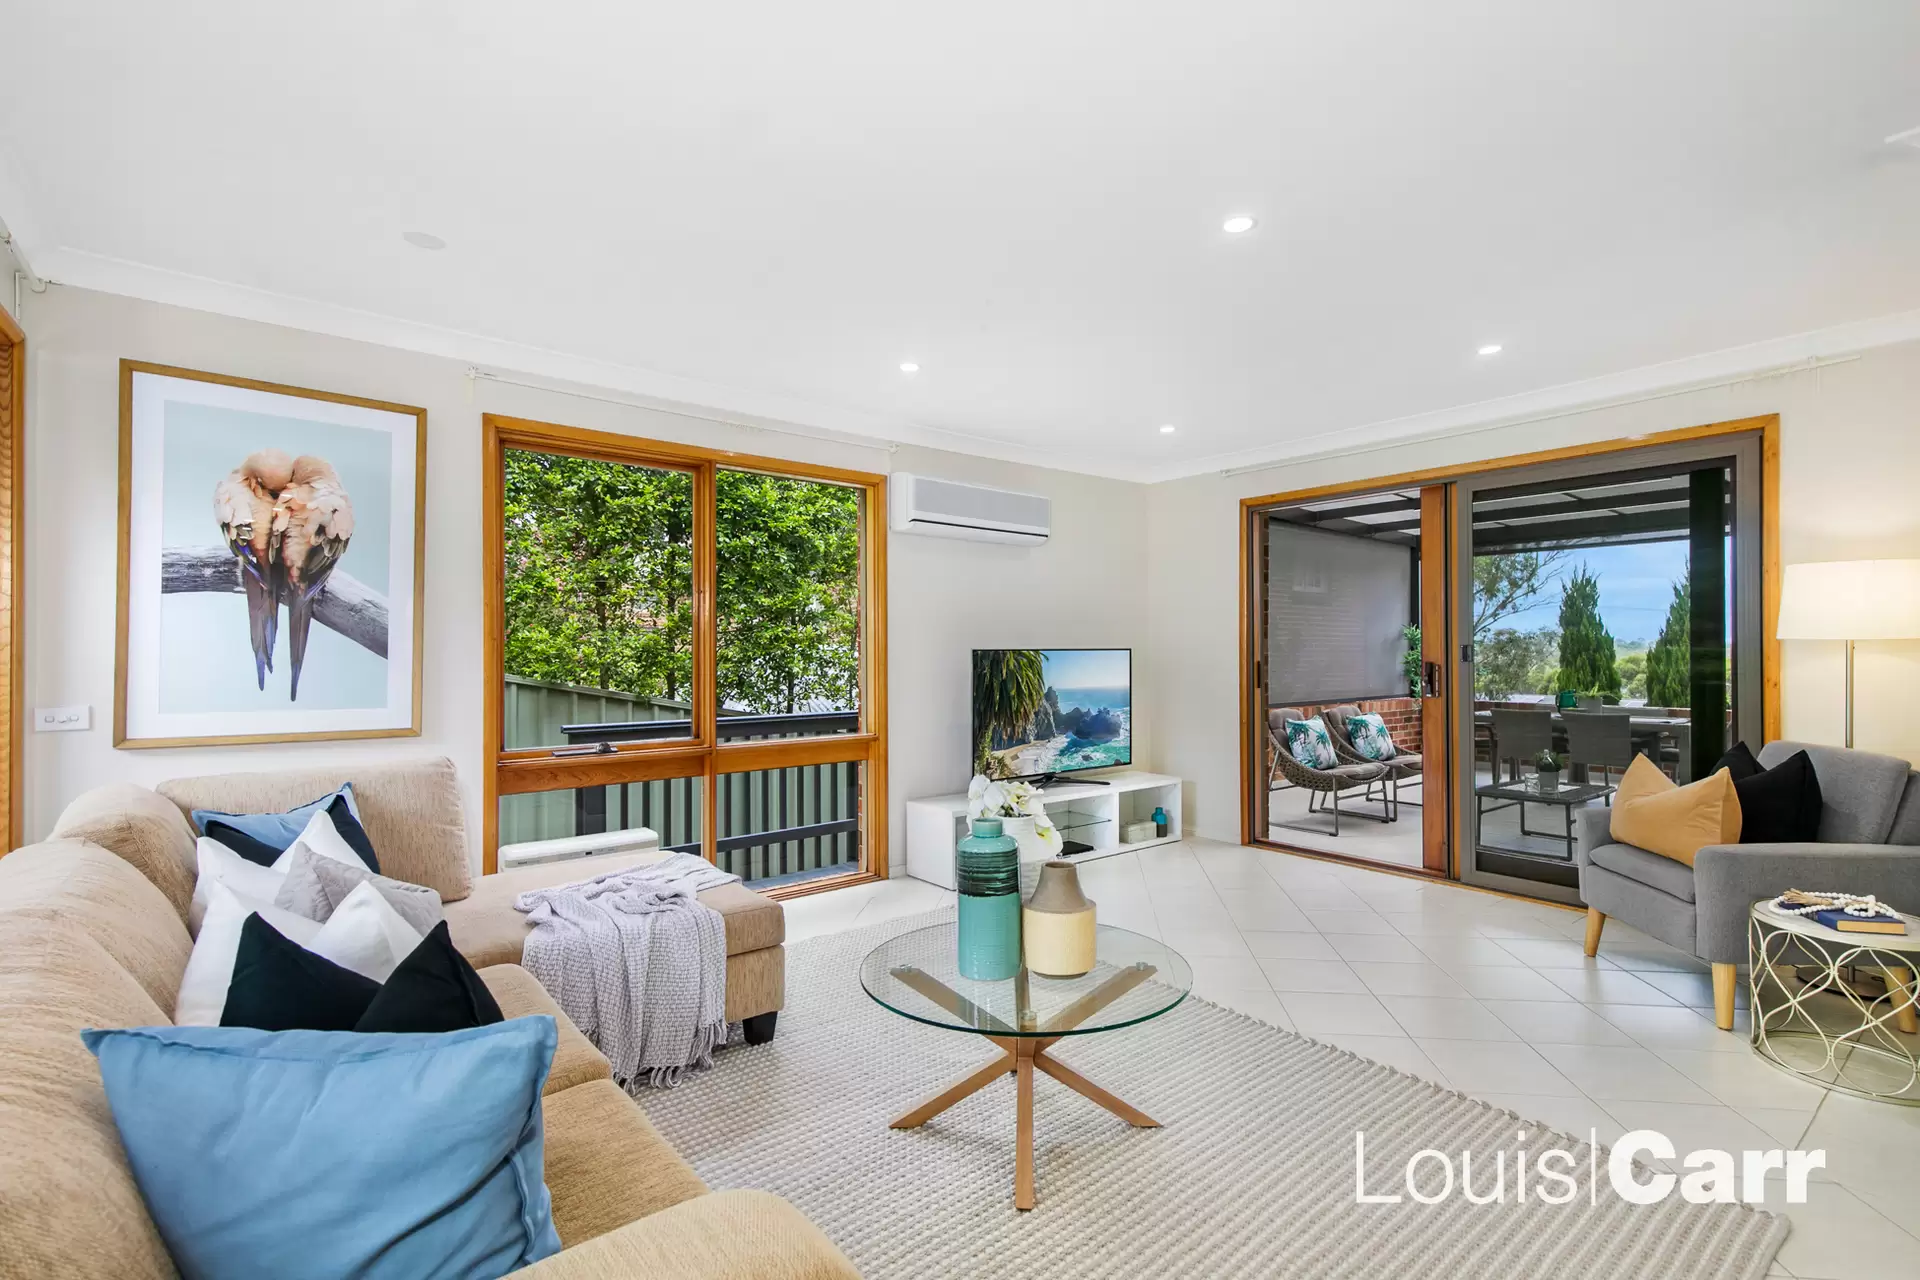 Photo #9: 165 Shepherds Drive, Cherrybrook - Auction by Louis Carr Real Estate